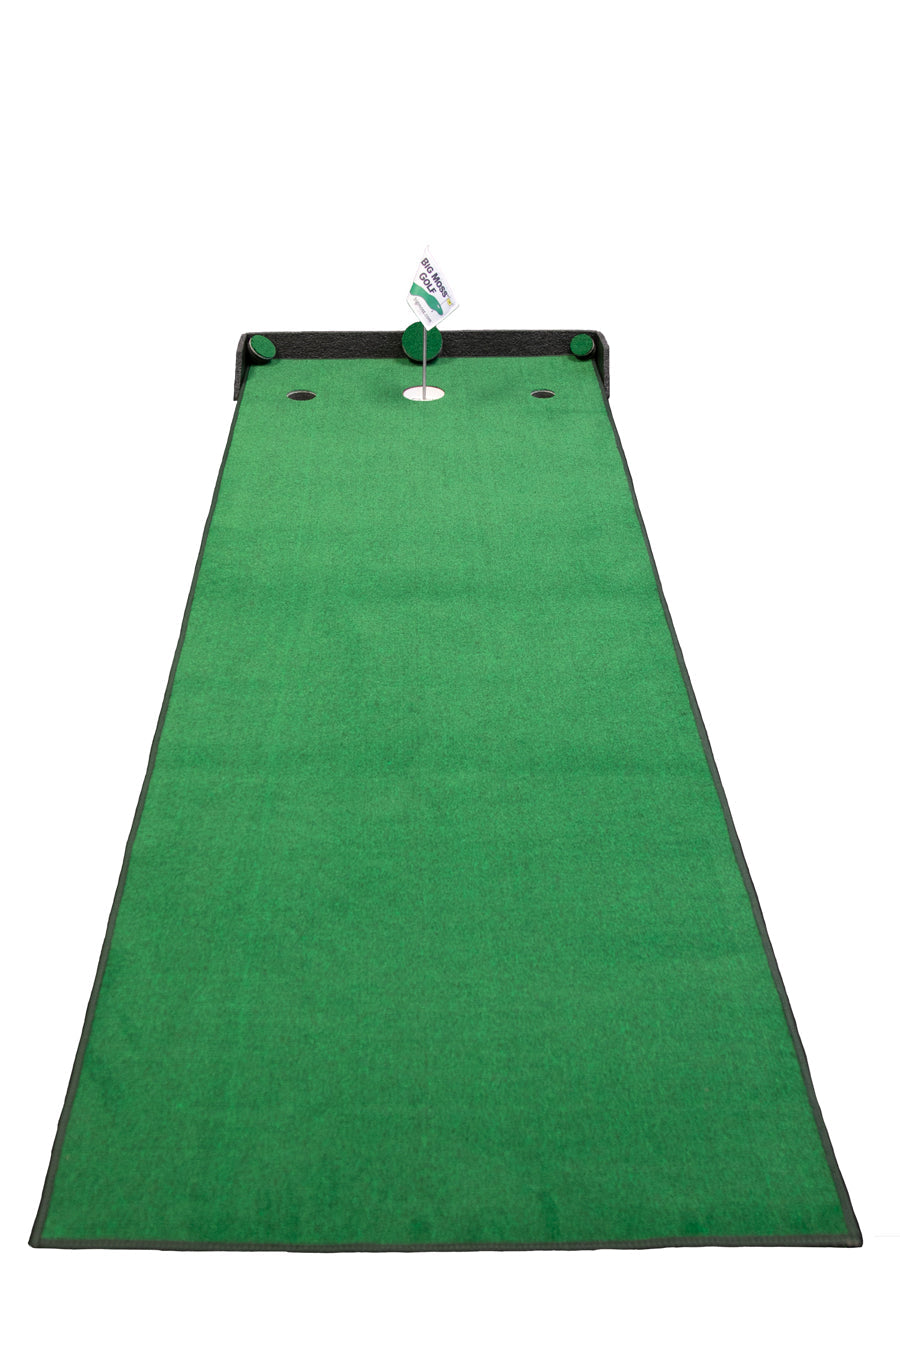 Big Moss Competitor PRO TW Putting Green